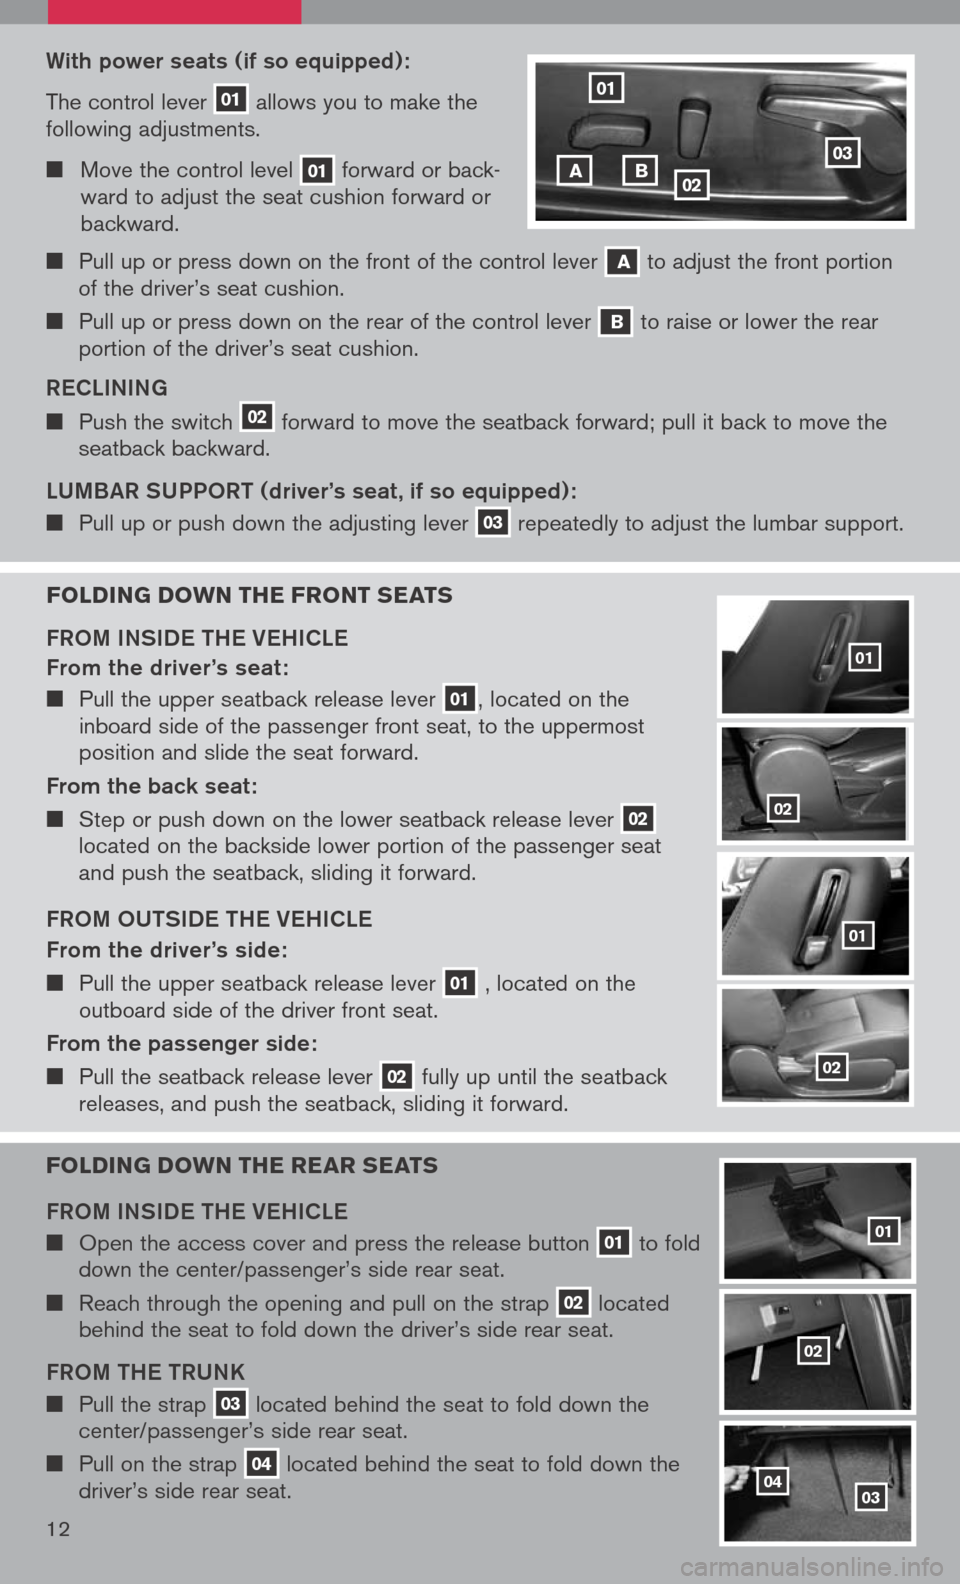 NISSAN ALTIMA 2008 L32A / 4.G Quick Reference Guide 
With power seats (if so equipped):
The control lever 01 allows you to make the following adjustments.
  Move the control level 01 forward or back-ward to adjust the seat cushion forward or backwar